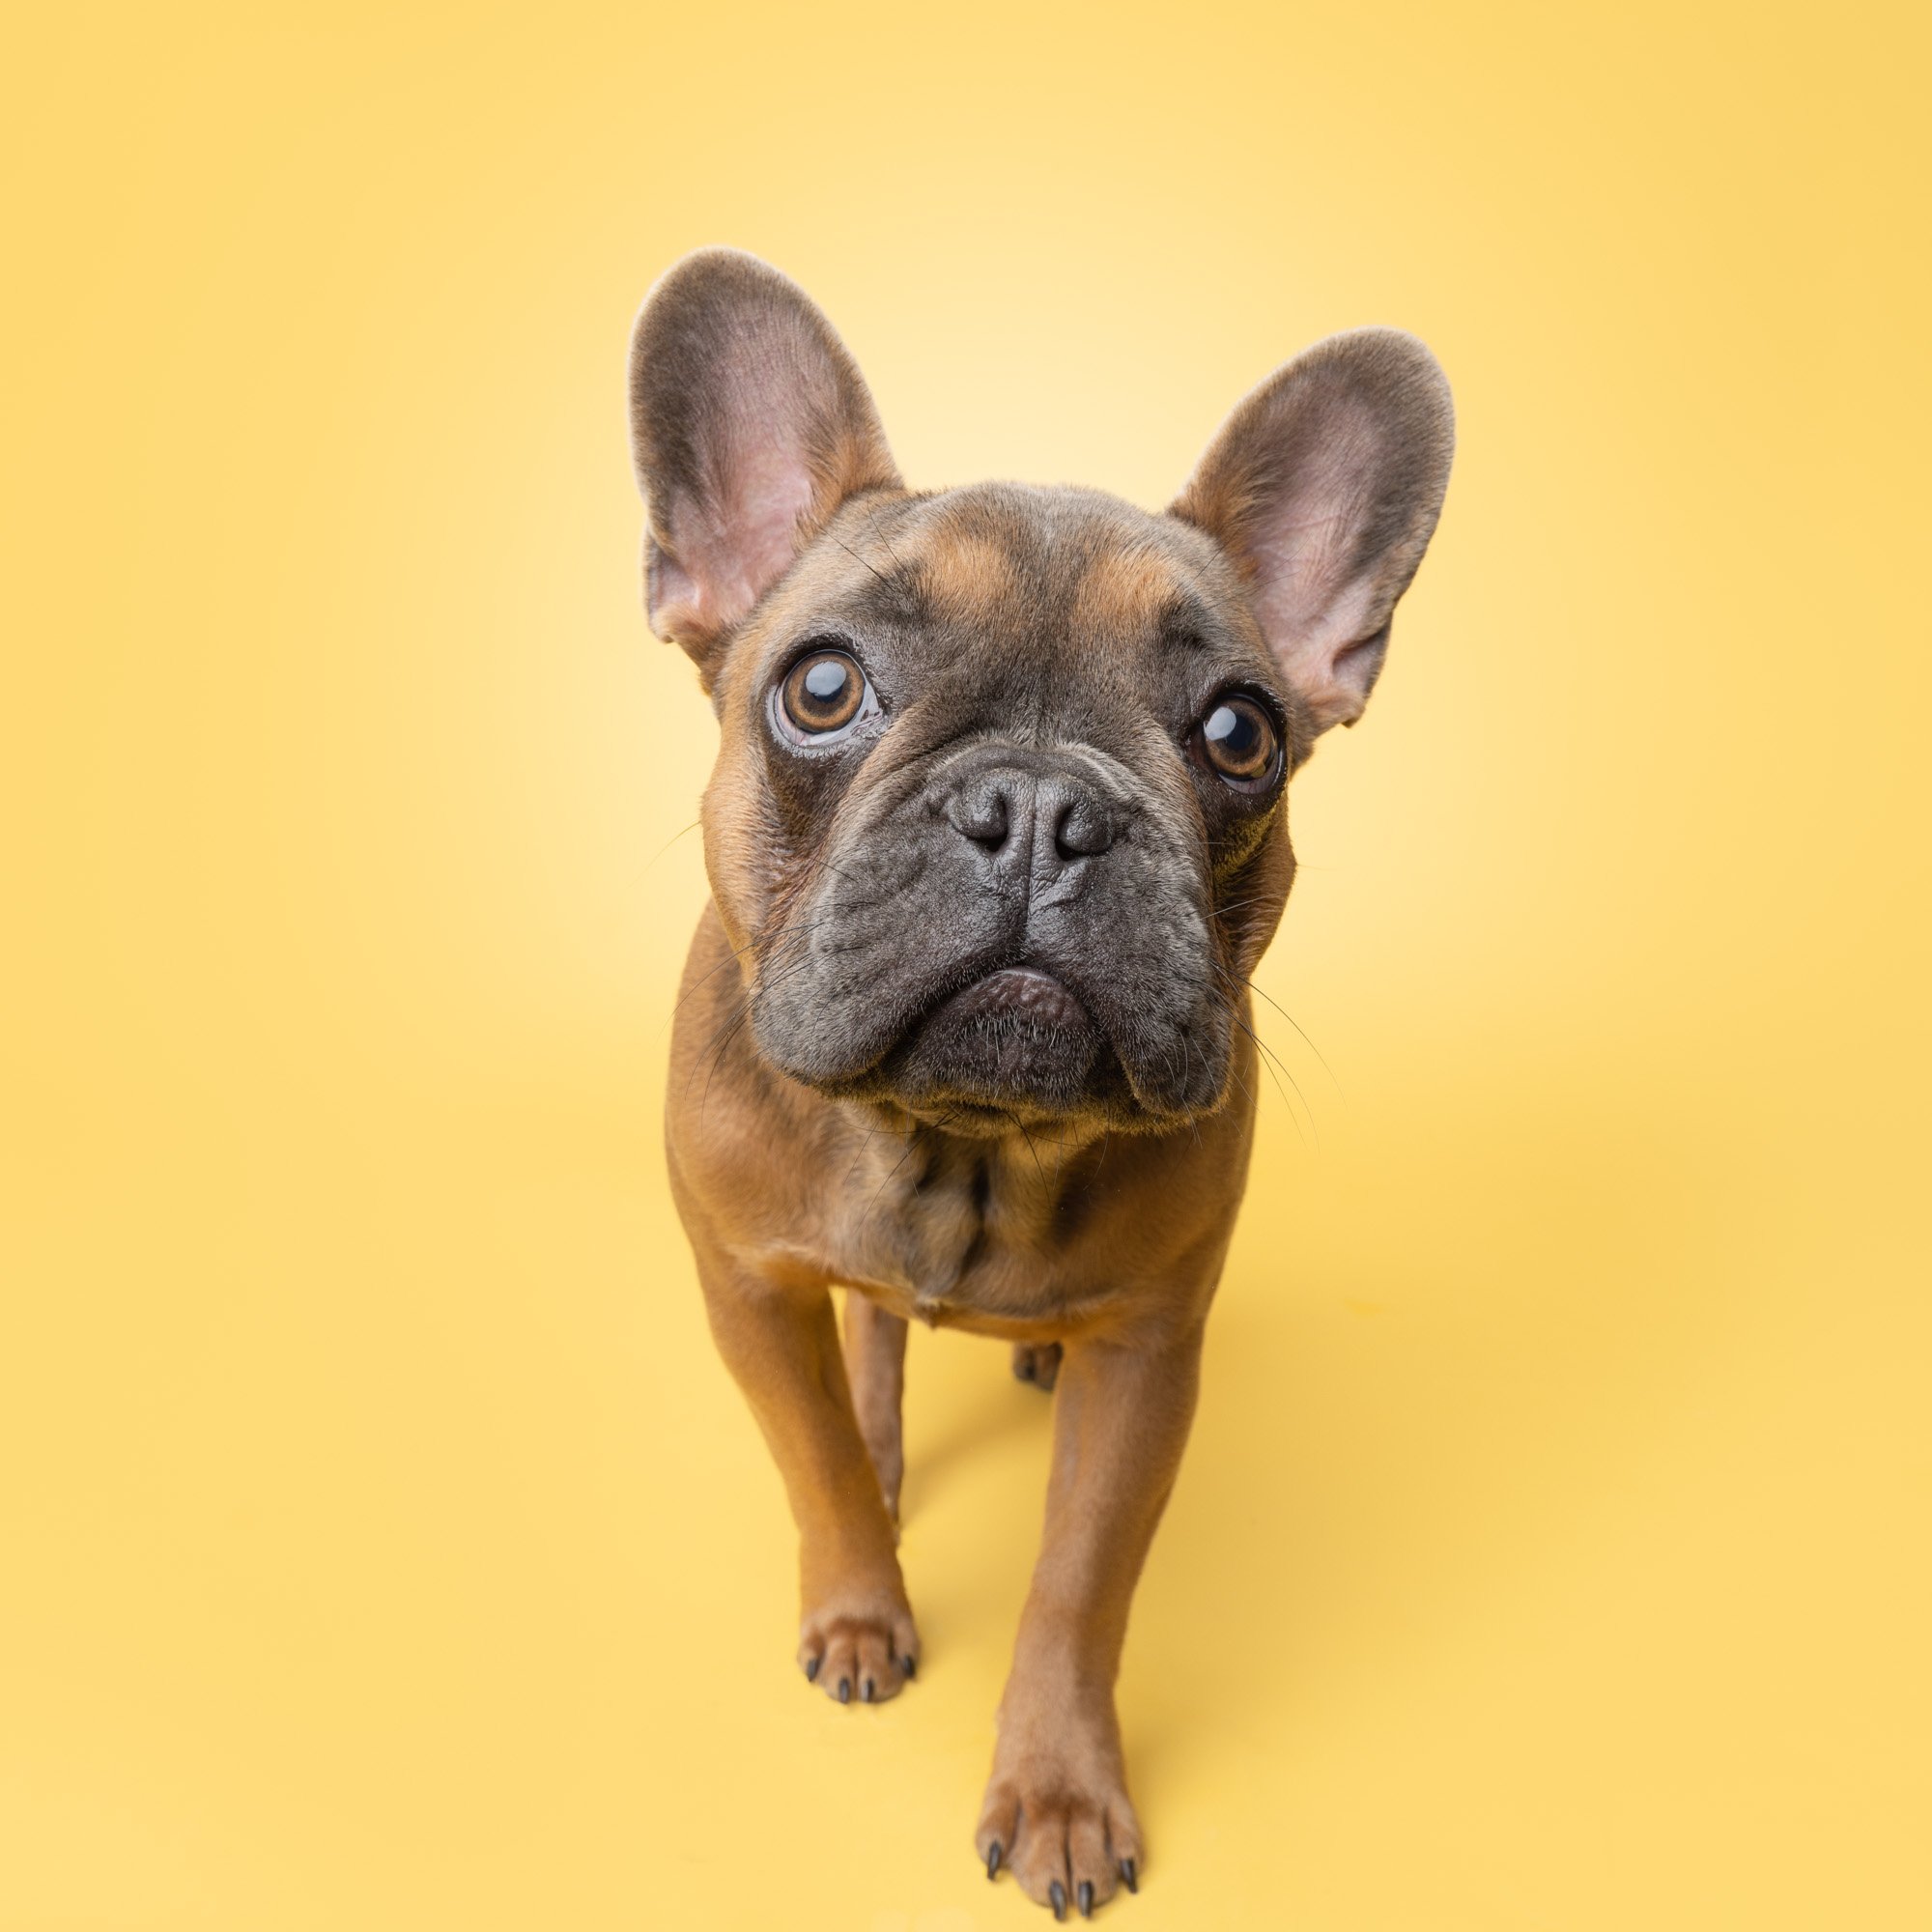 Greg Murray Photography | Pet and Animal Stock Photography | studio portrait of french bulldog standing against yellow backdrop.jpg